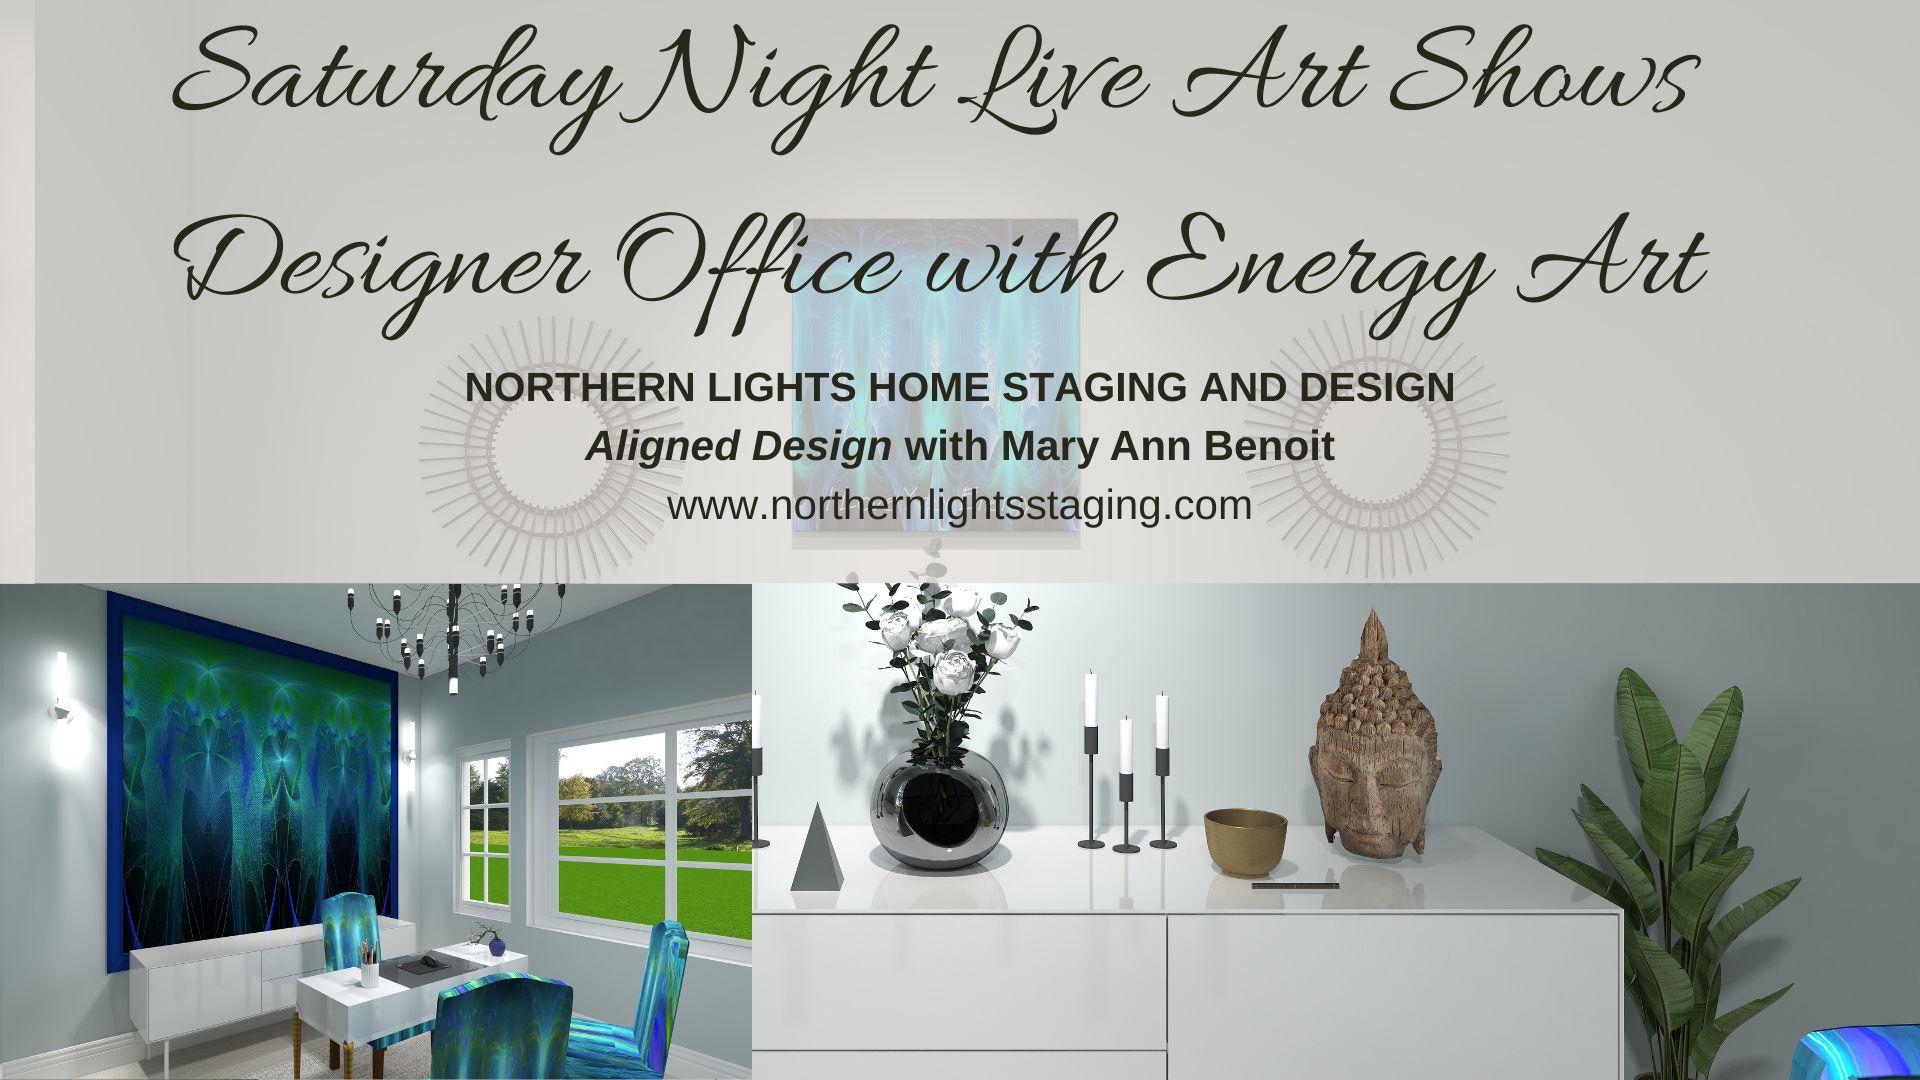 Saturday Night Live Art Shows- Designer Office with Energy Art